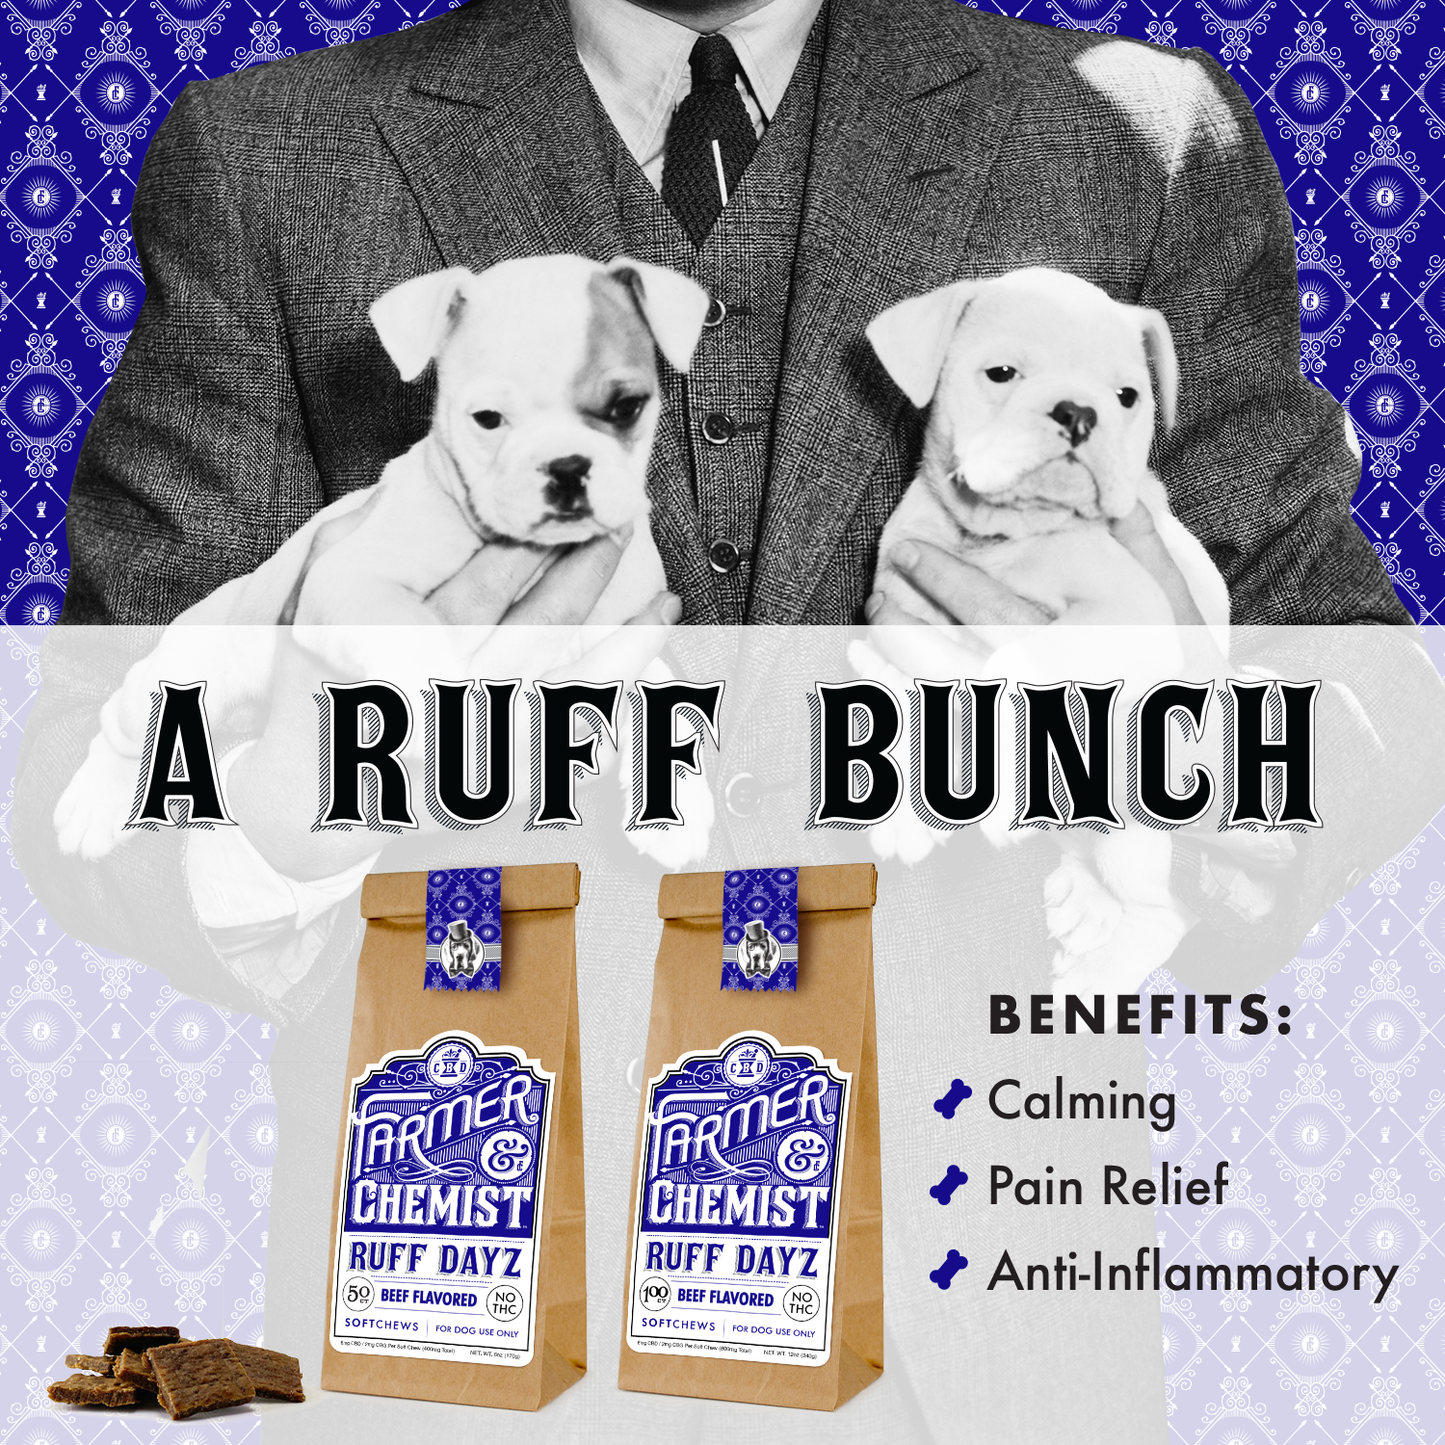 RUFF DAYZ - 50ct Beef Flavored Dog Soft Chews (Case pack of 4)